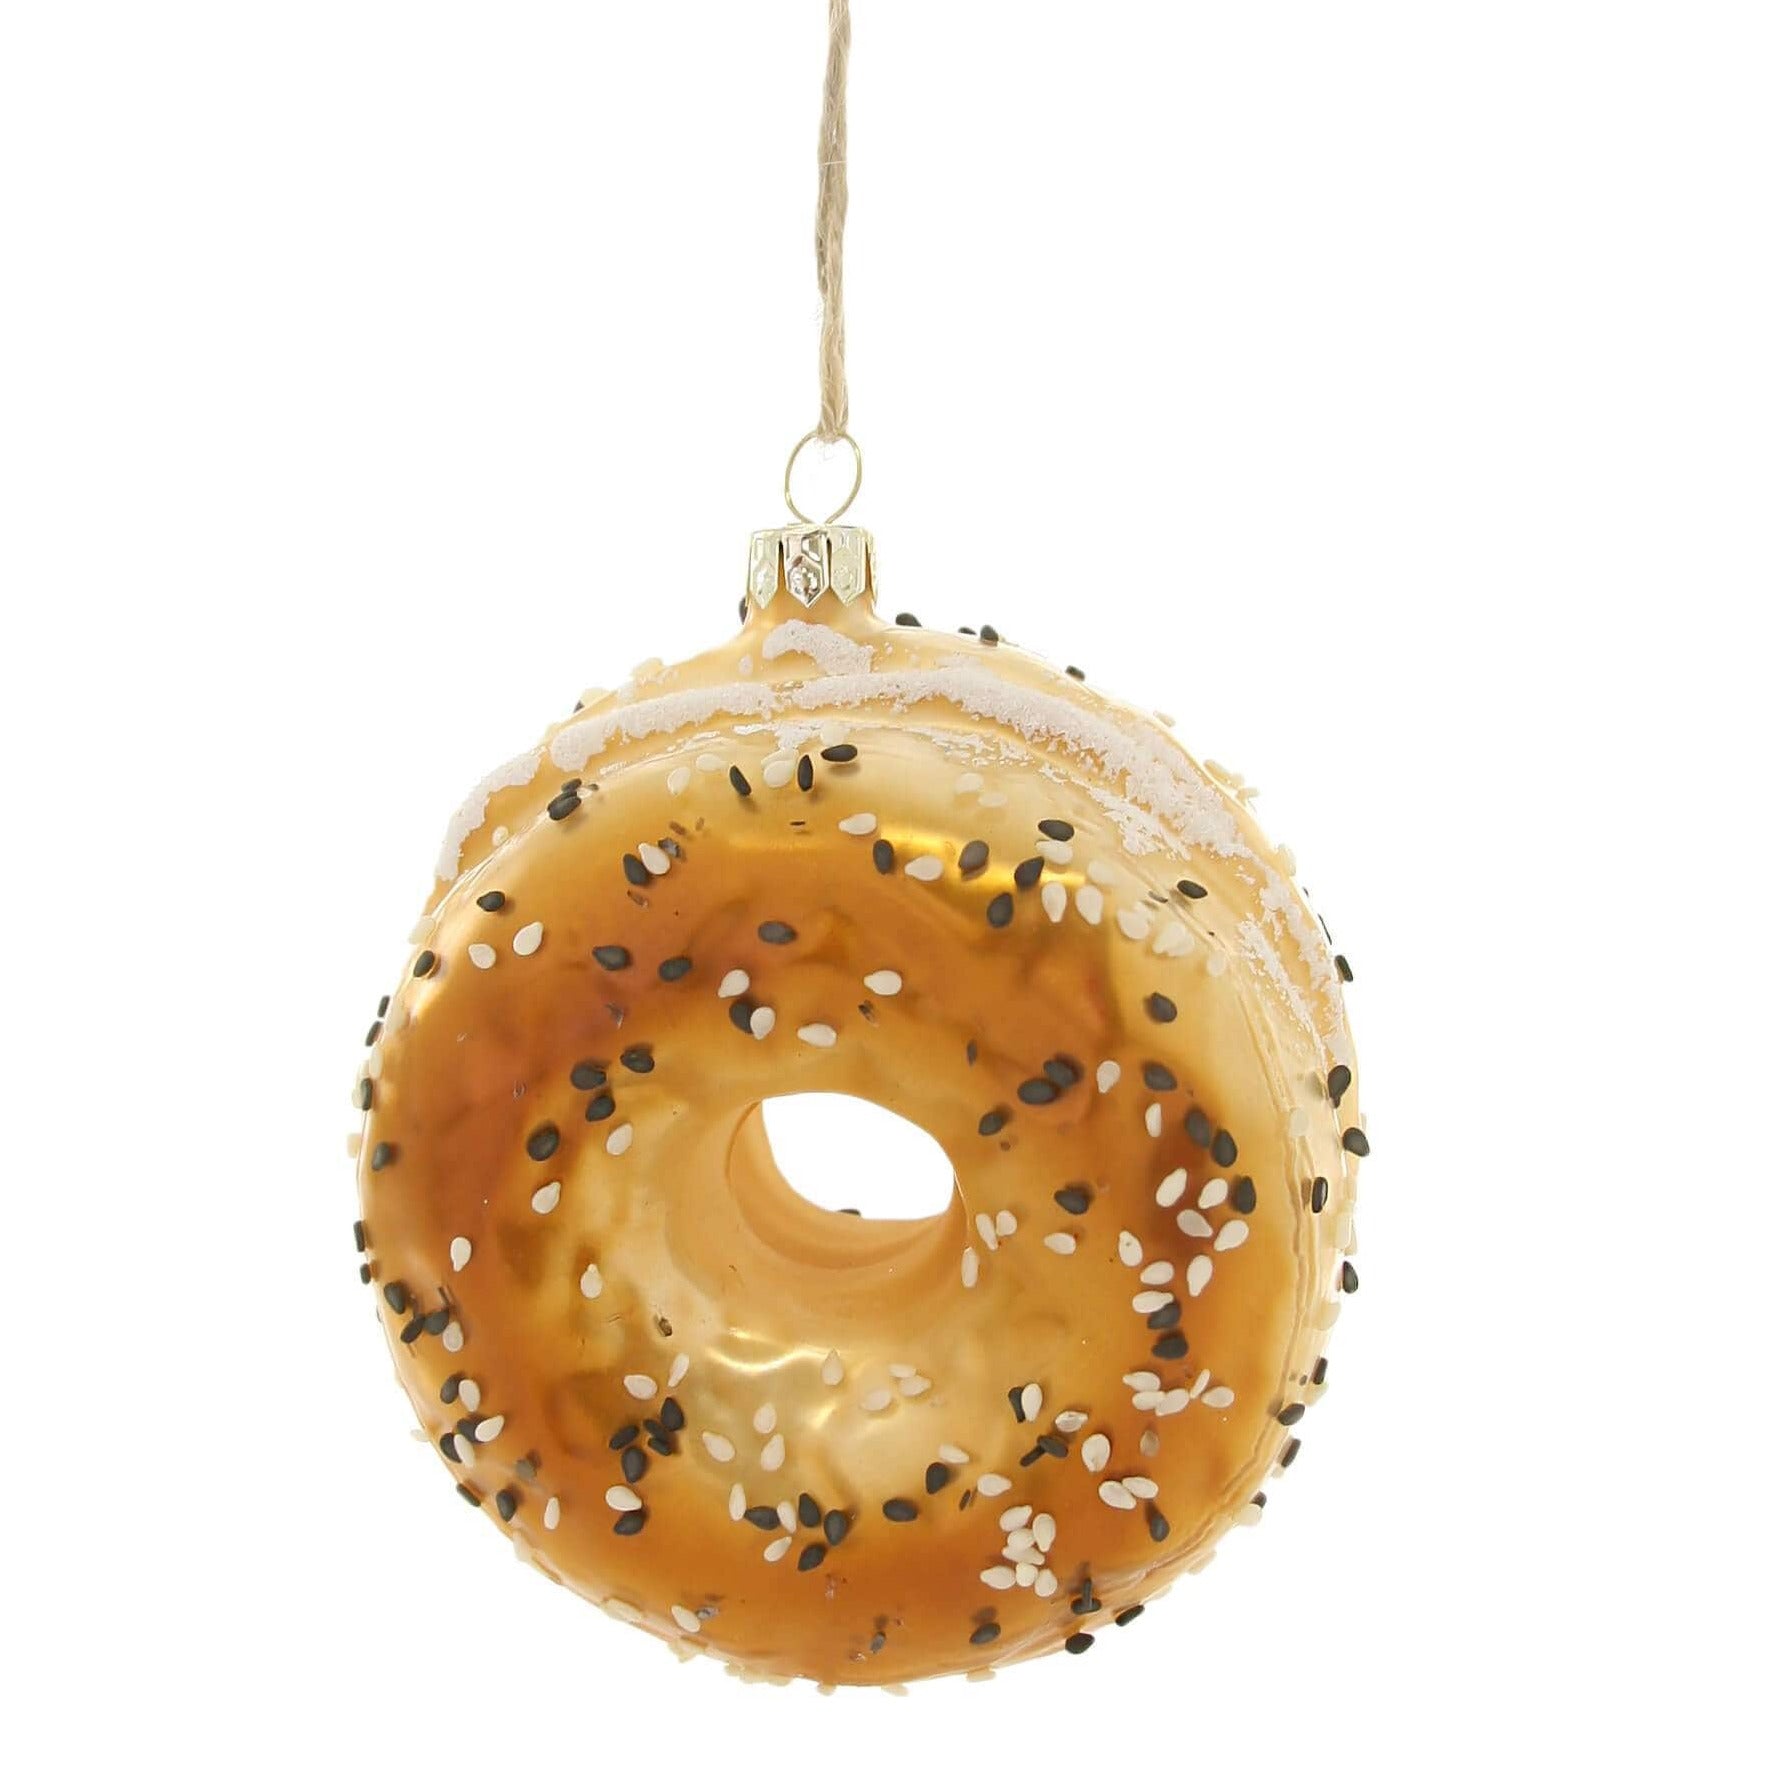 Cody Foster Ornaments Everything Bagel Ornament by Cody Foster